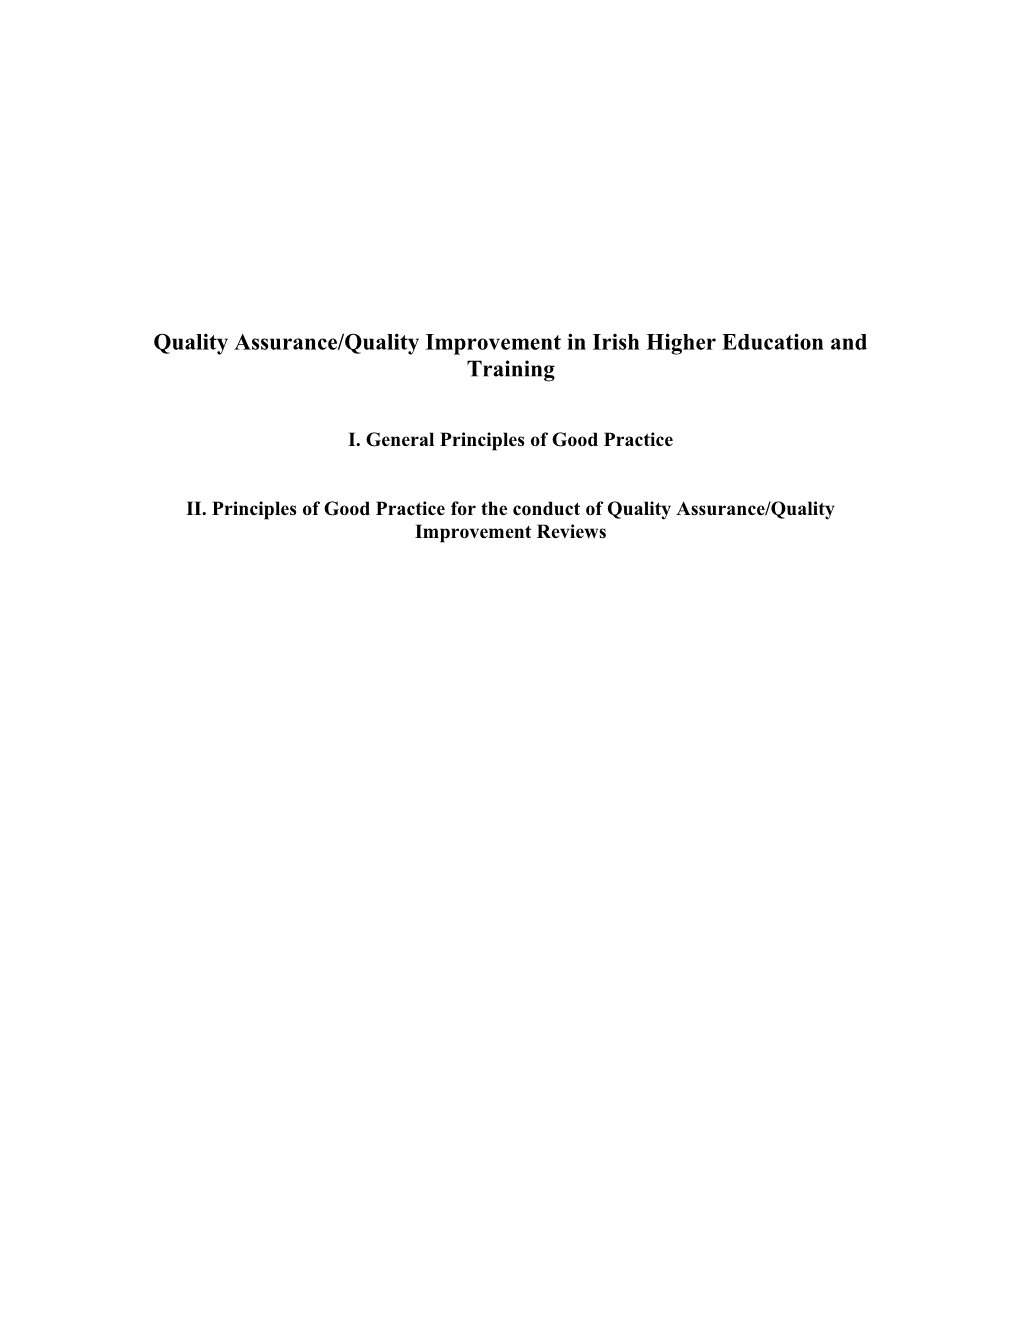 Principles of Good Practice in Quality Assurance/Quality Improvement for Irish Higher Education